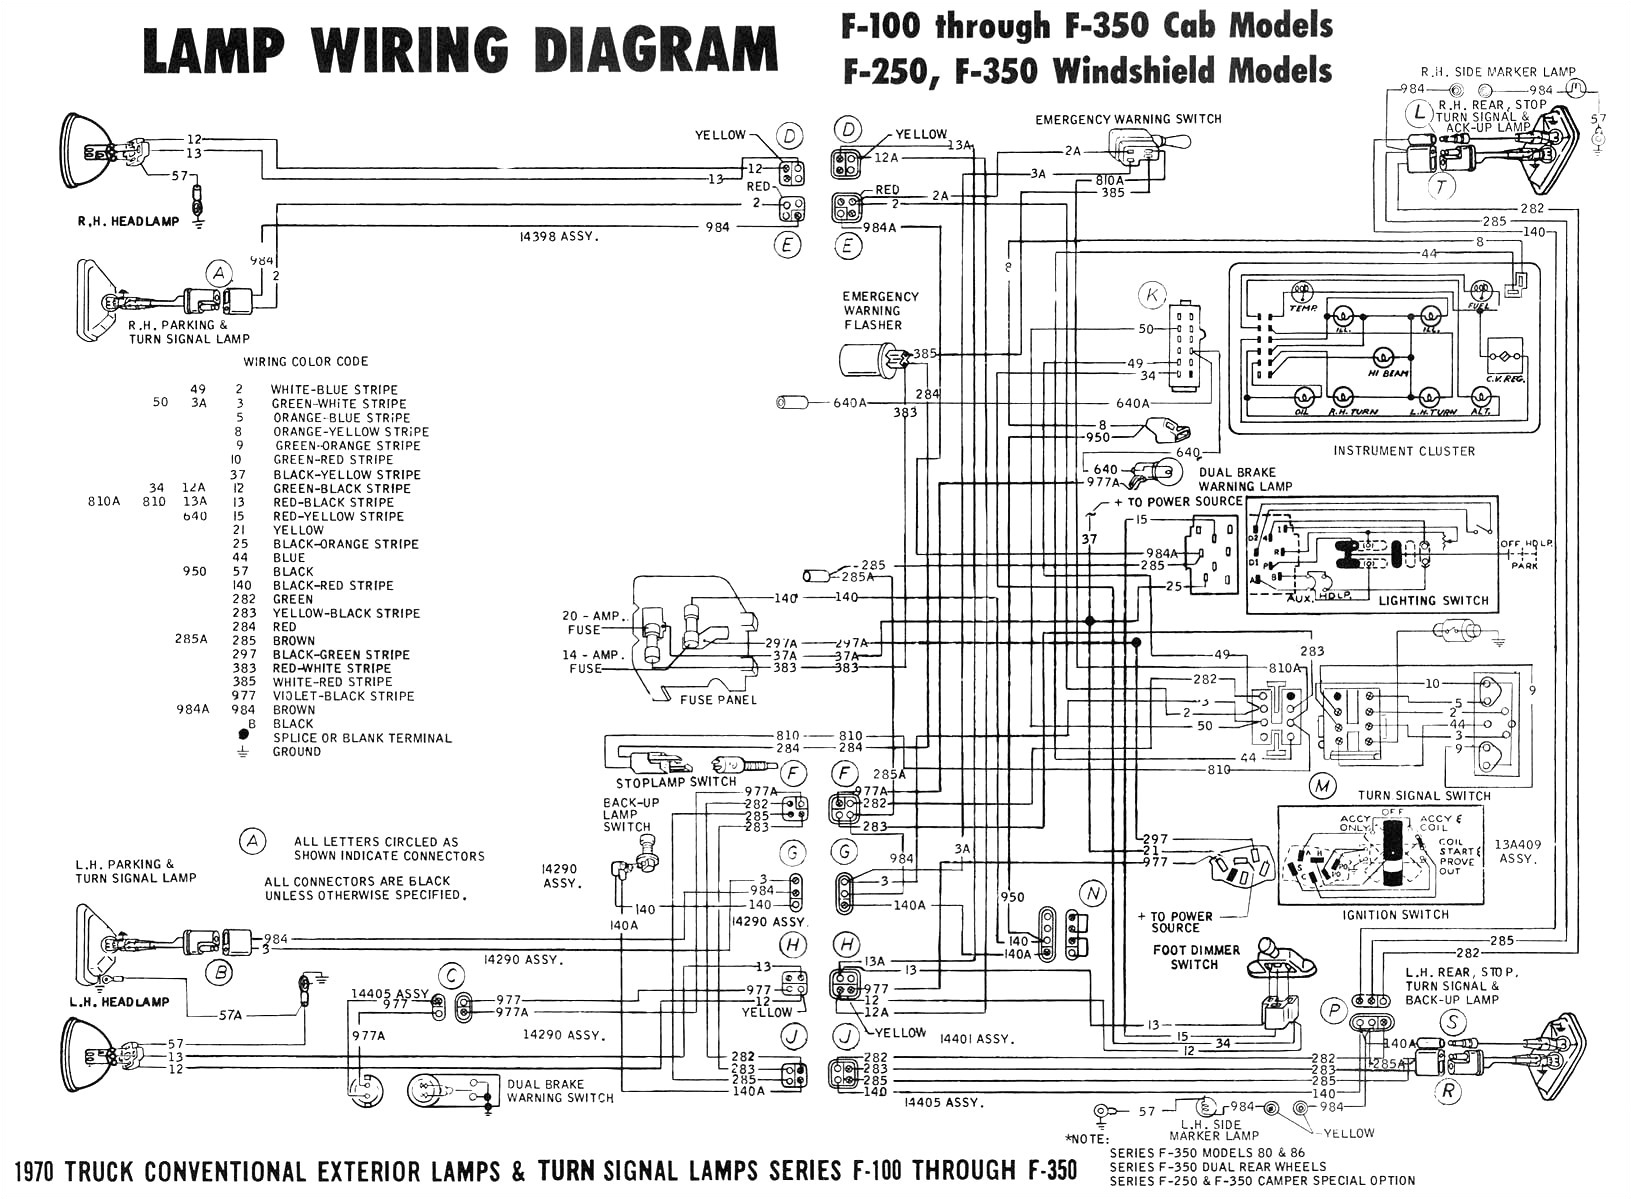 transmission wiring harness on triumph spitfire 1500 engine diagram mix jeep wiring diagram overdrive wiring diagram